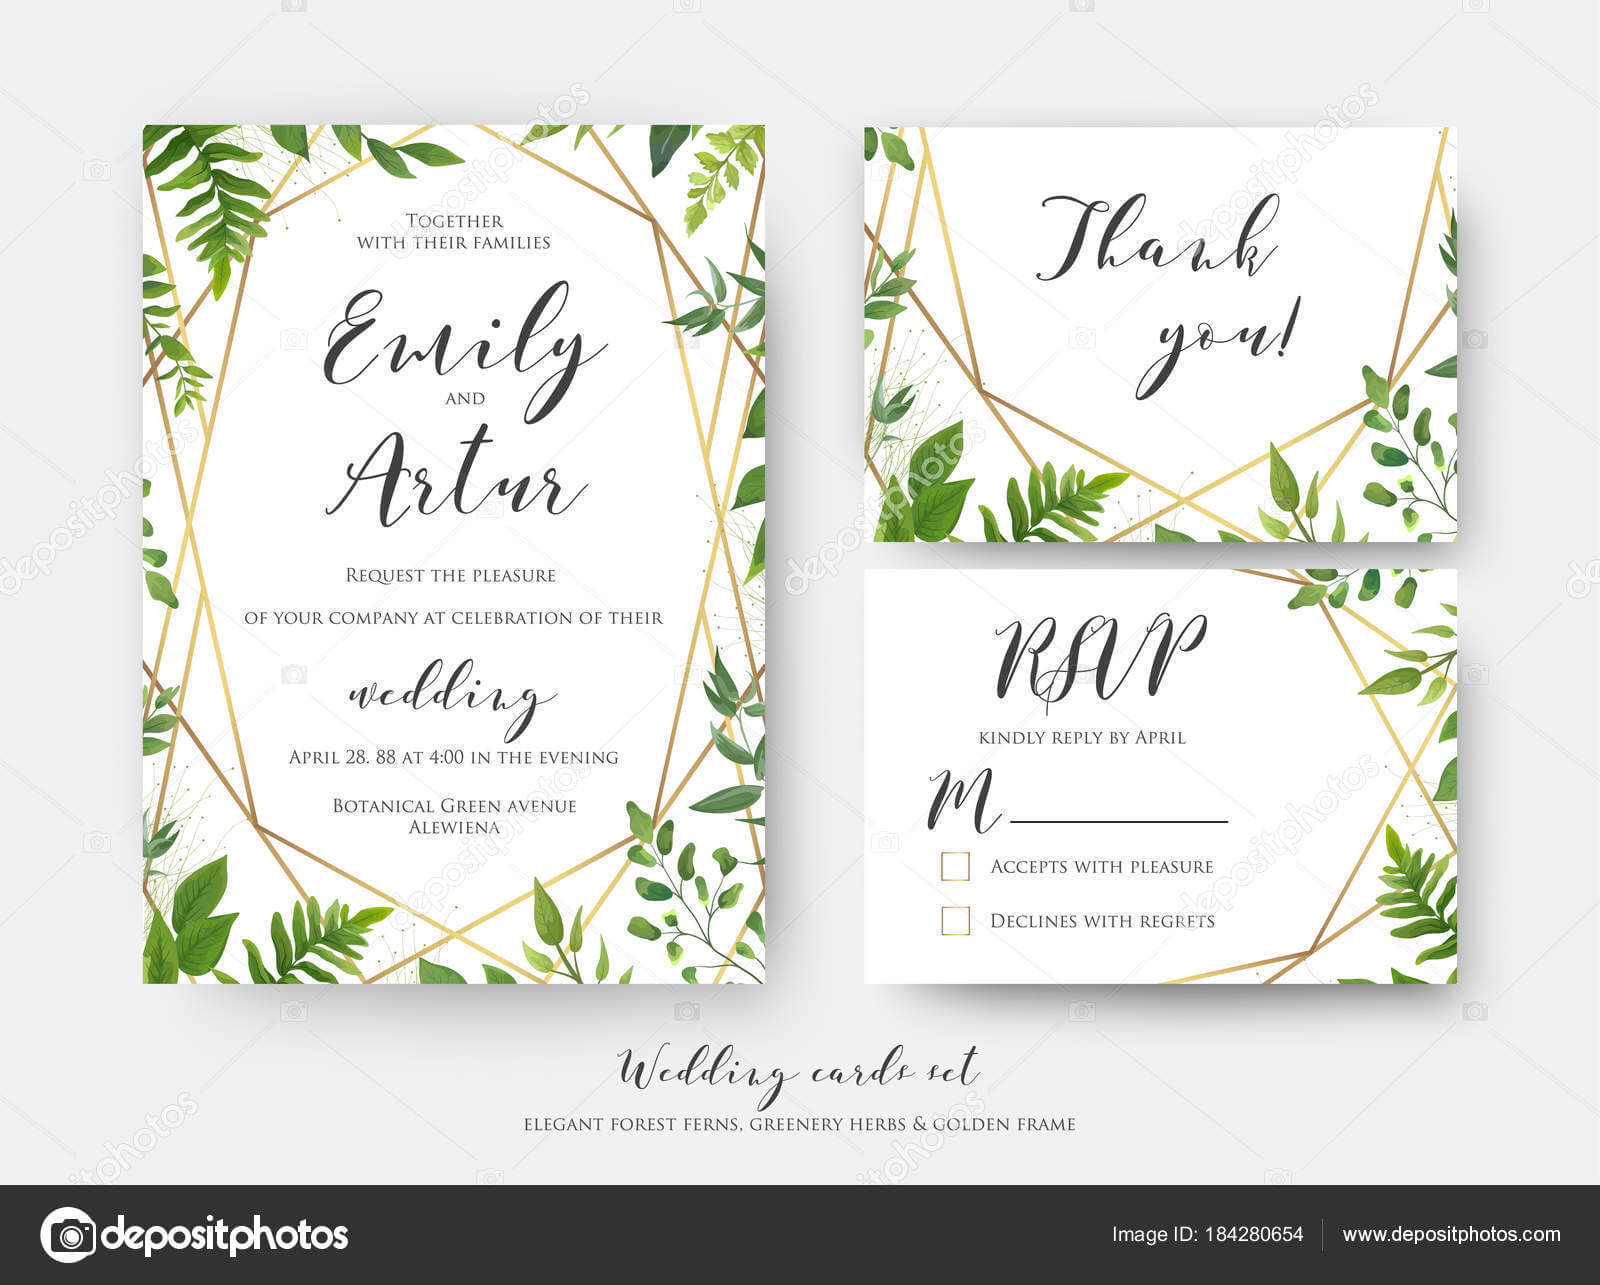 Wedding Card Size Template Within Wedding Card Size Template